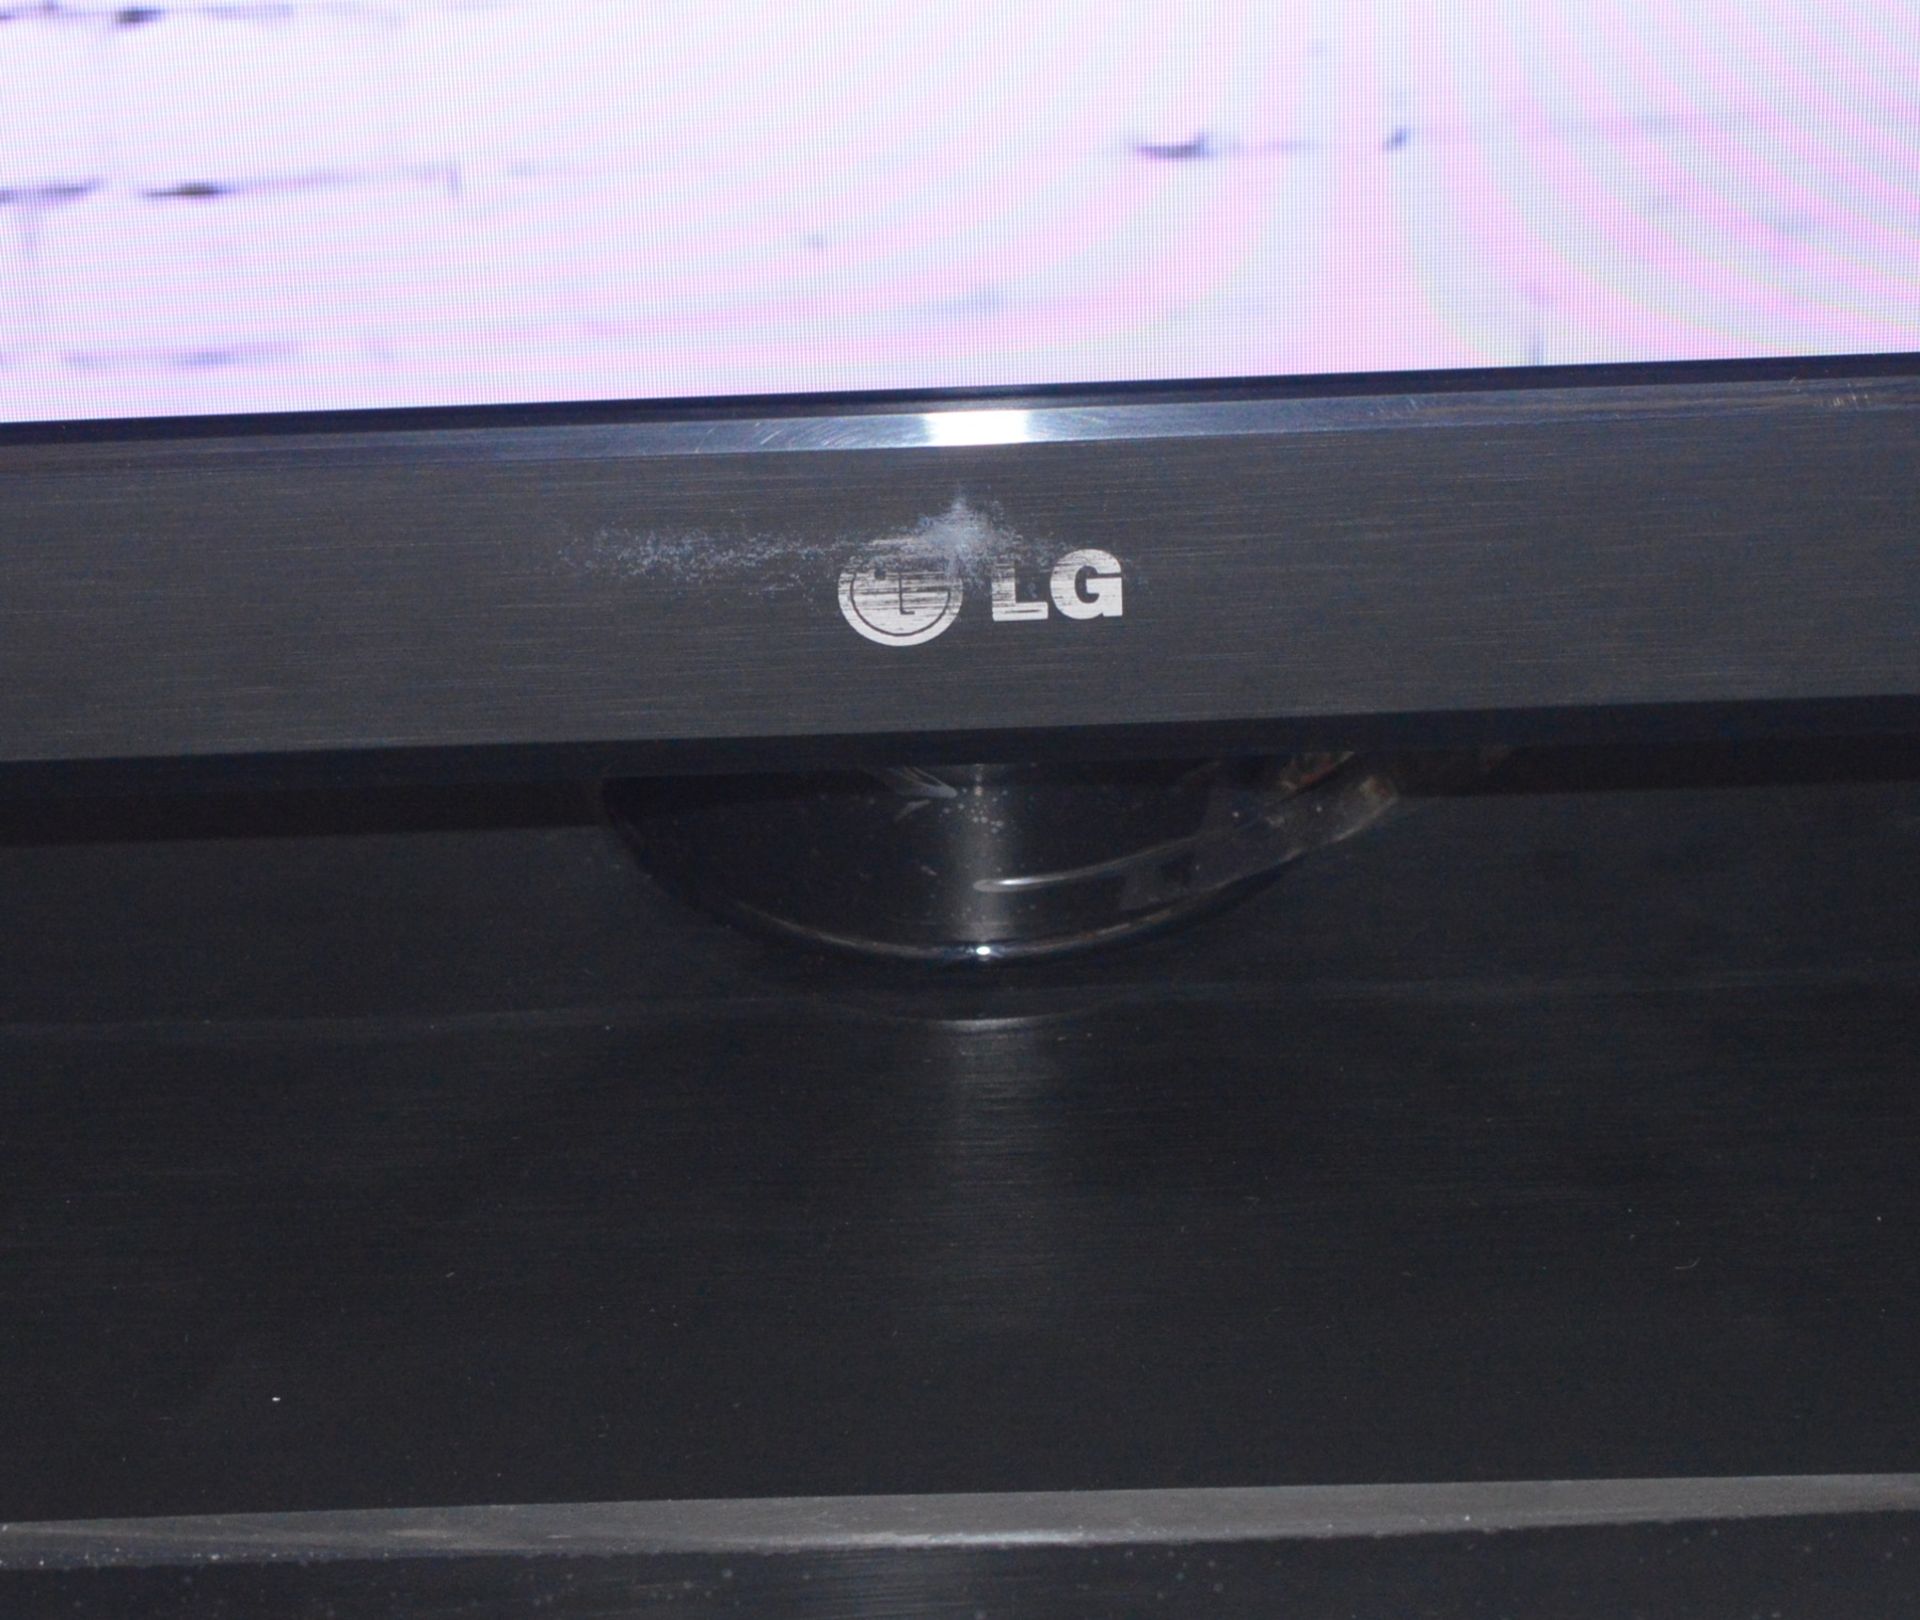 1 x LG 42LT360C 42 inch HD Ready LED TV with Freeview and 3 HDMI Ports - CL011 - Good Working - Image 4 of 11